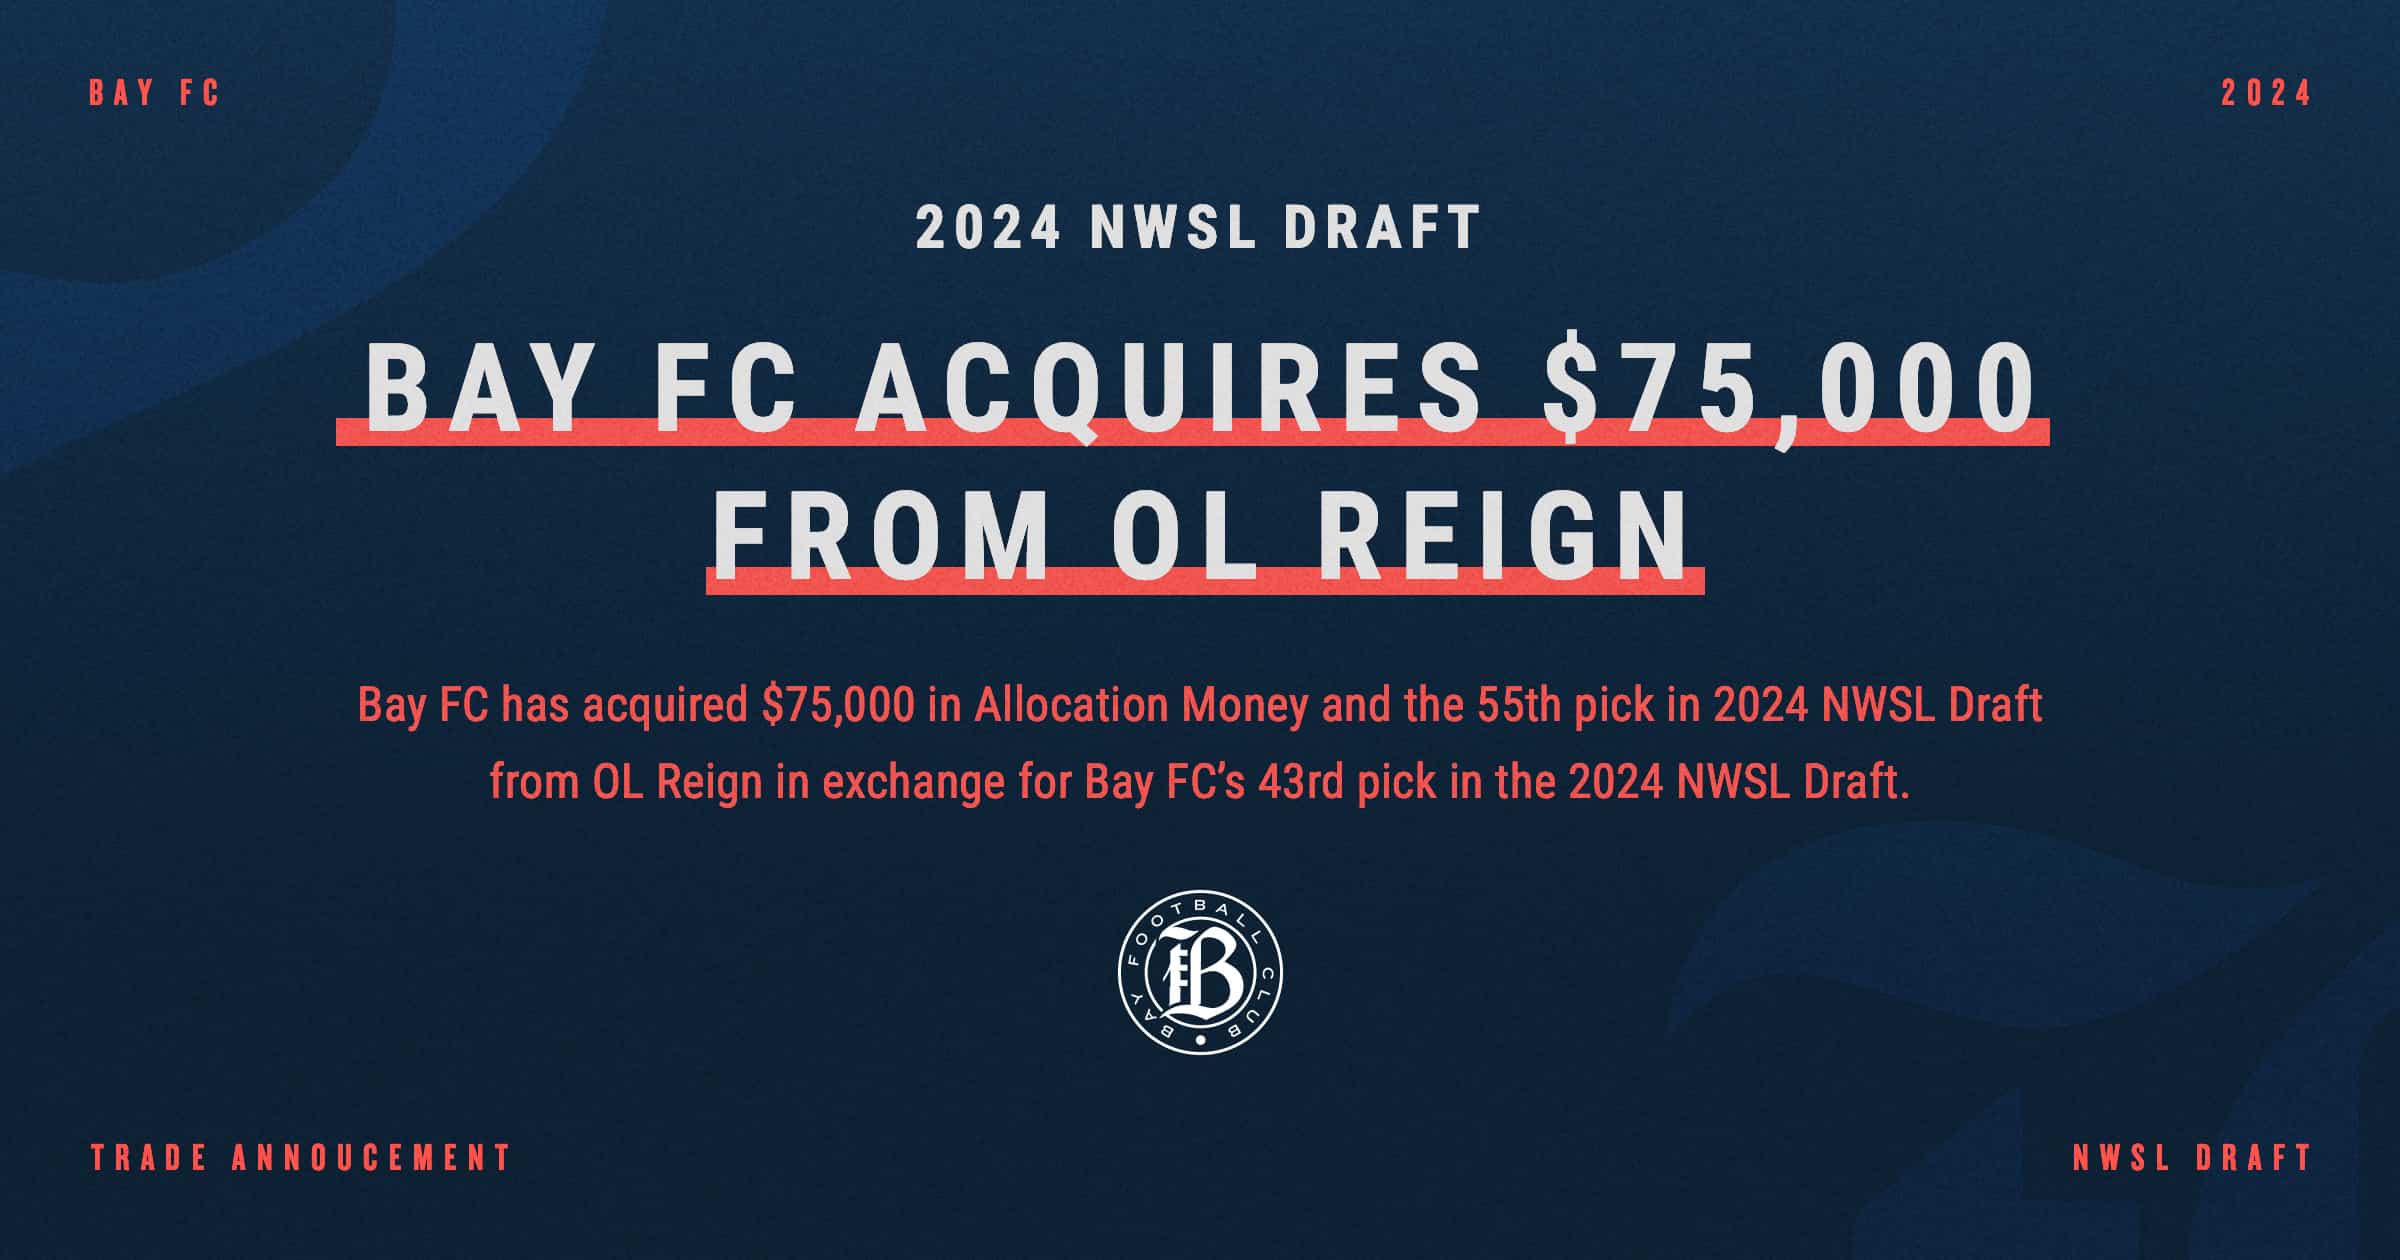 Bay FC acquires 75,000 Allocation Money, 55th pick in 2024 NWSL Draft